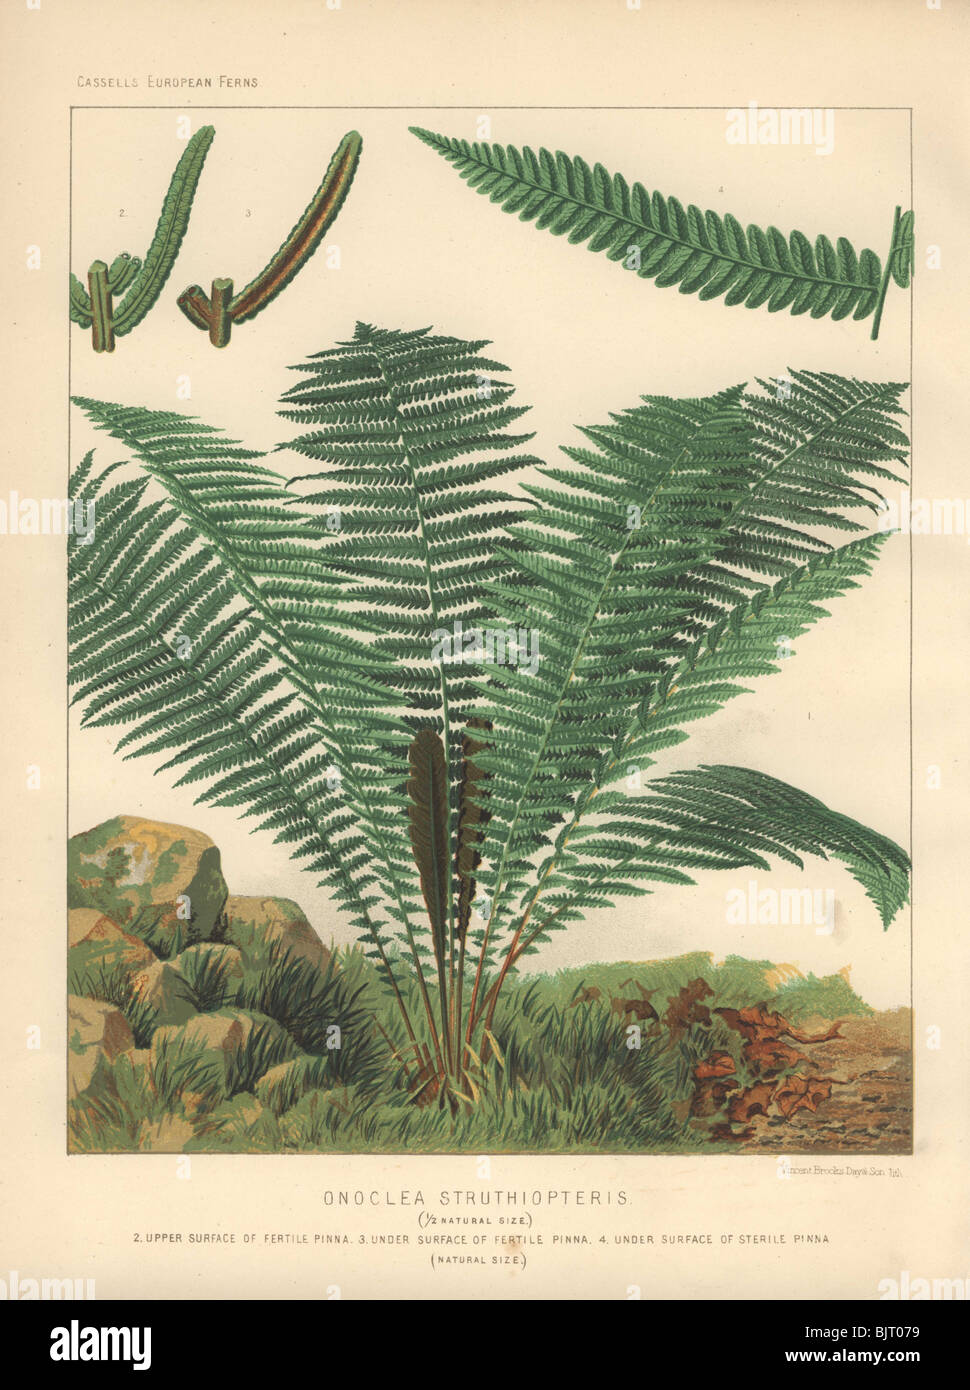 Ostrich or shuttlecock fern (Struthiopteris) shown on rocky, grassy ground. Onoclea struthiopteris, Matteuccia struthiopteris Stock Photo